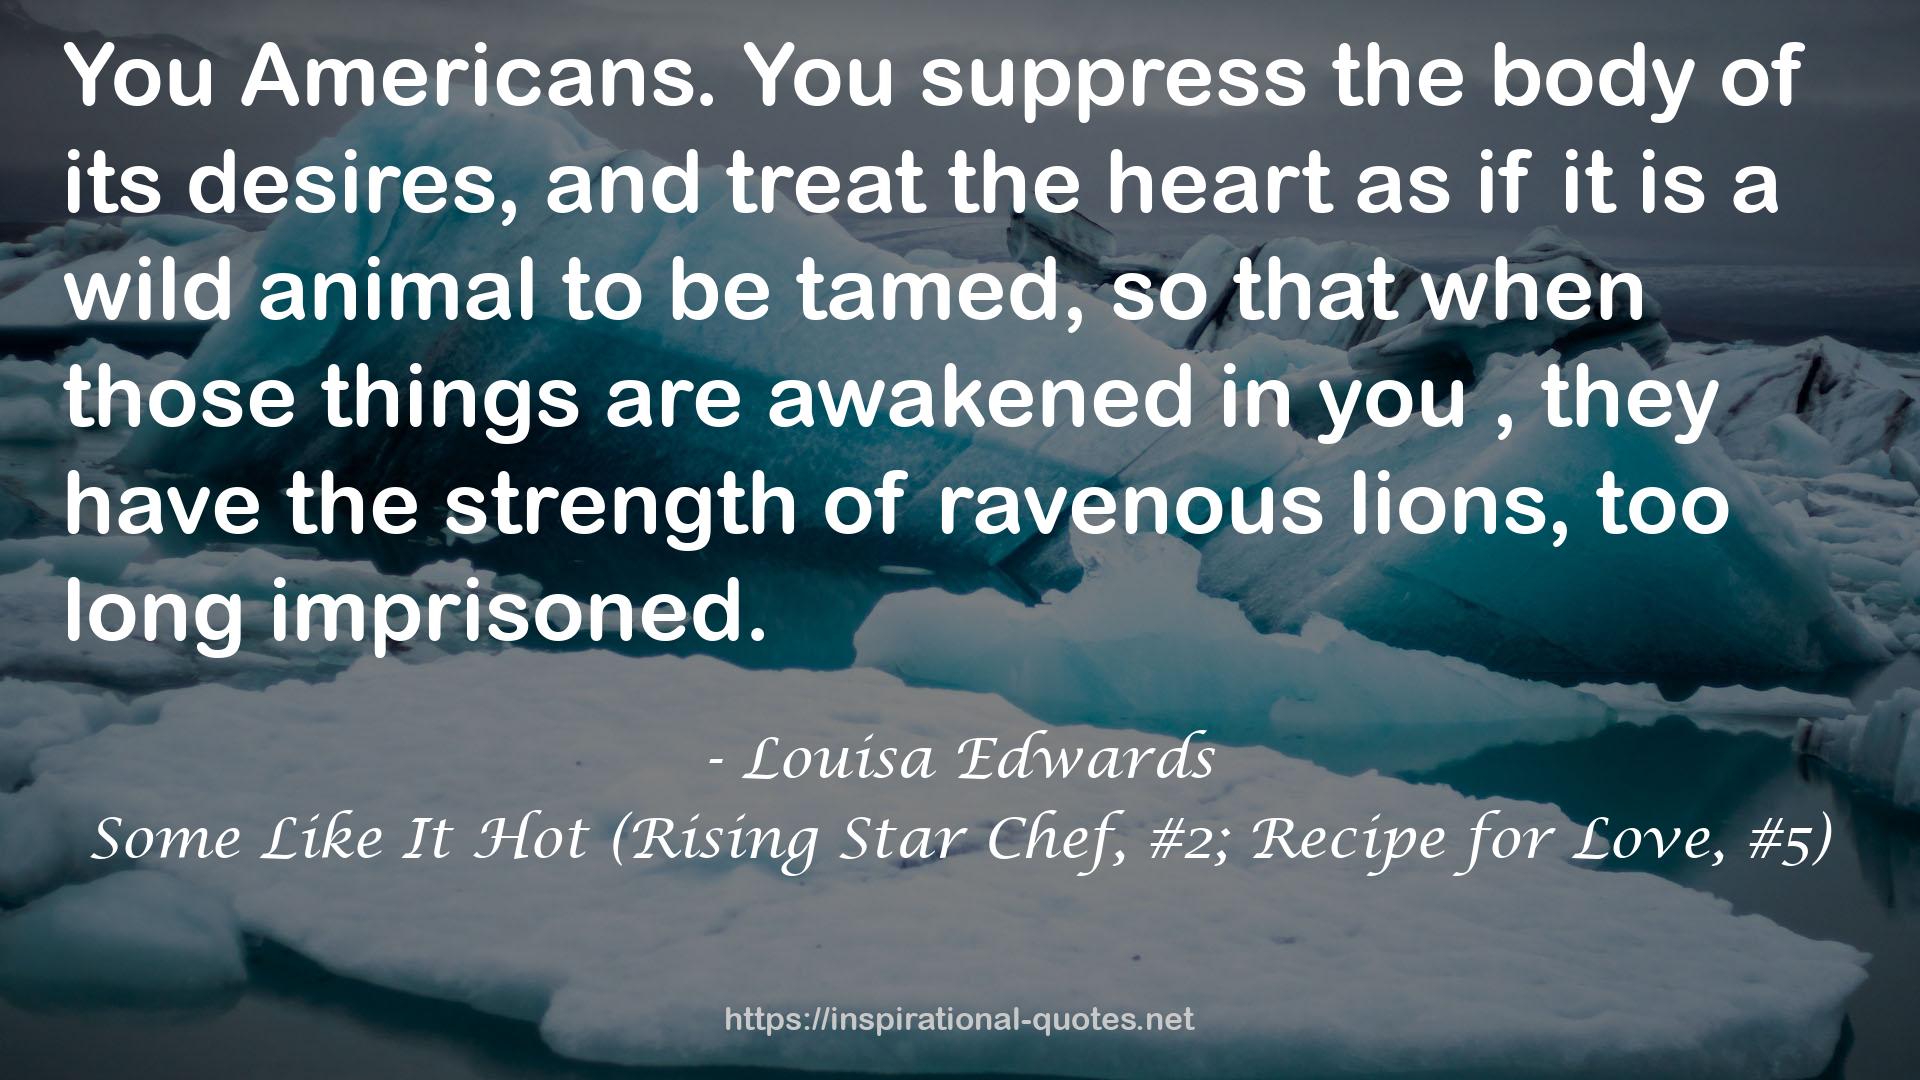 Some Like It Hot (Rising Star Chef, #2; Recipe for Love, #5) QUOTES